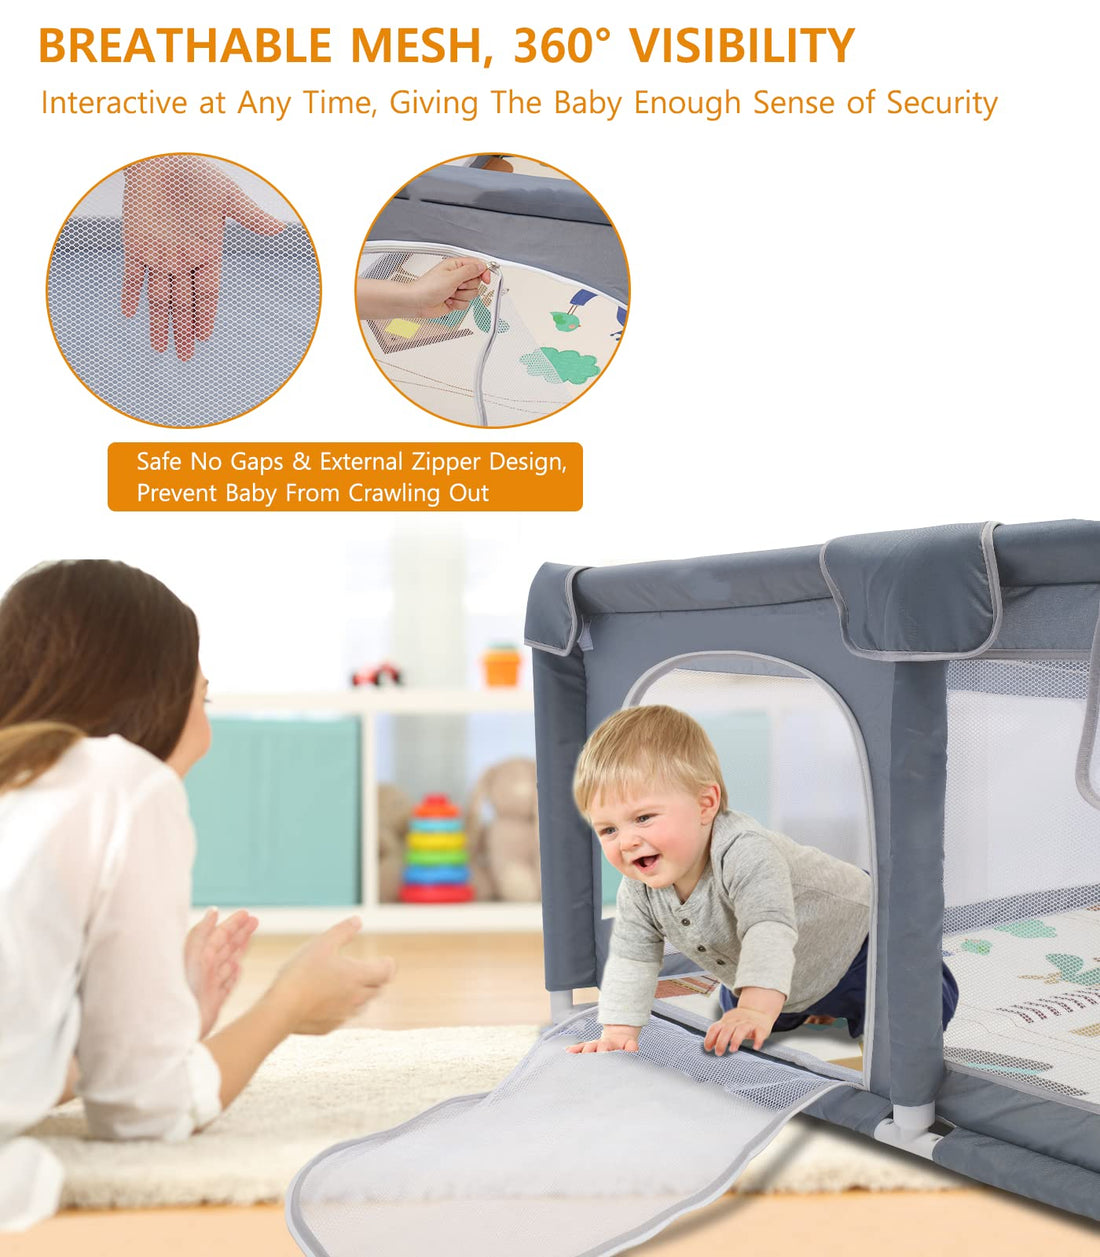 Playpens can promote the development of autonomy and independence in babies